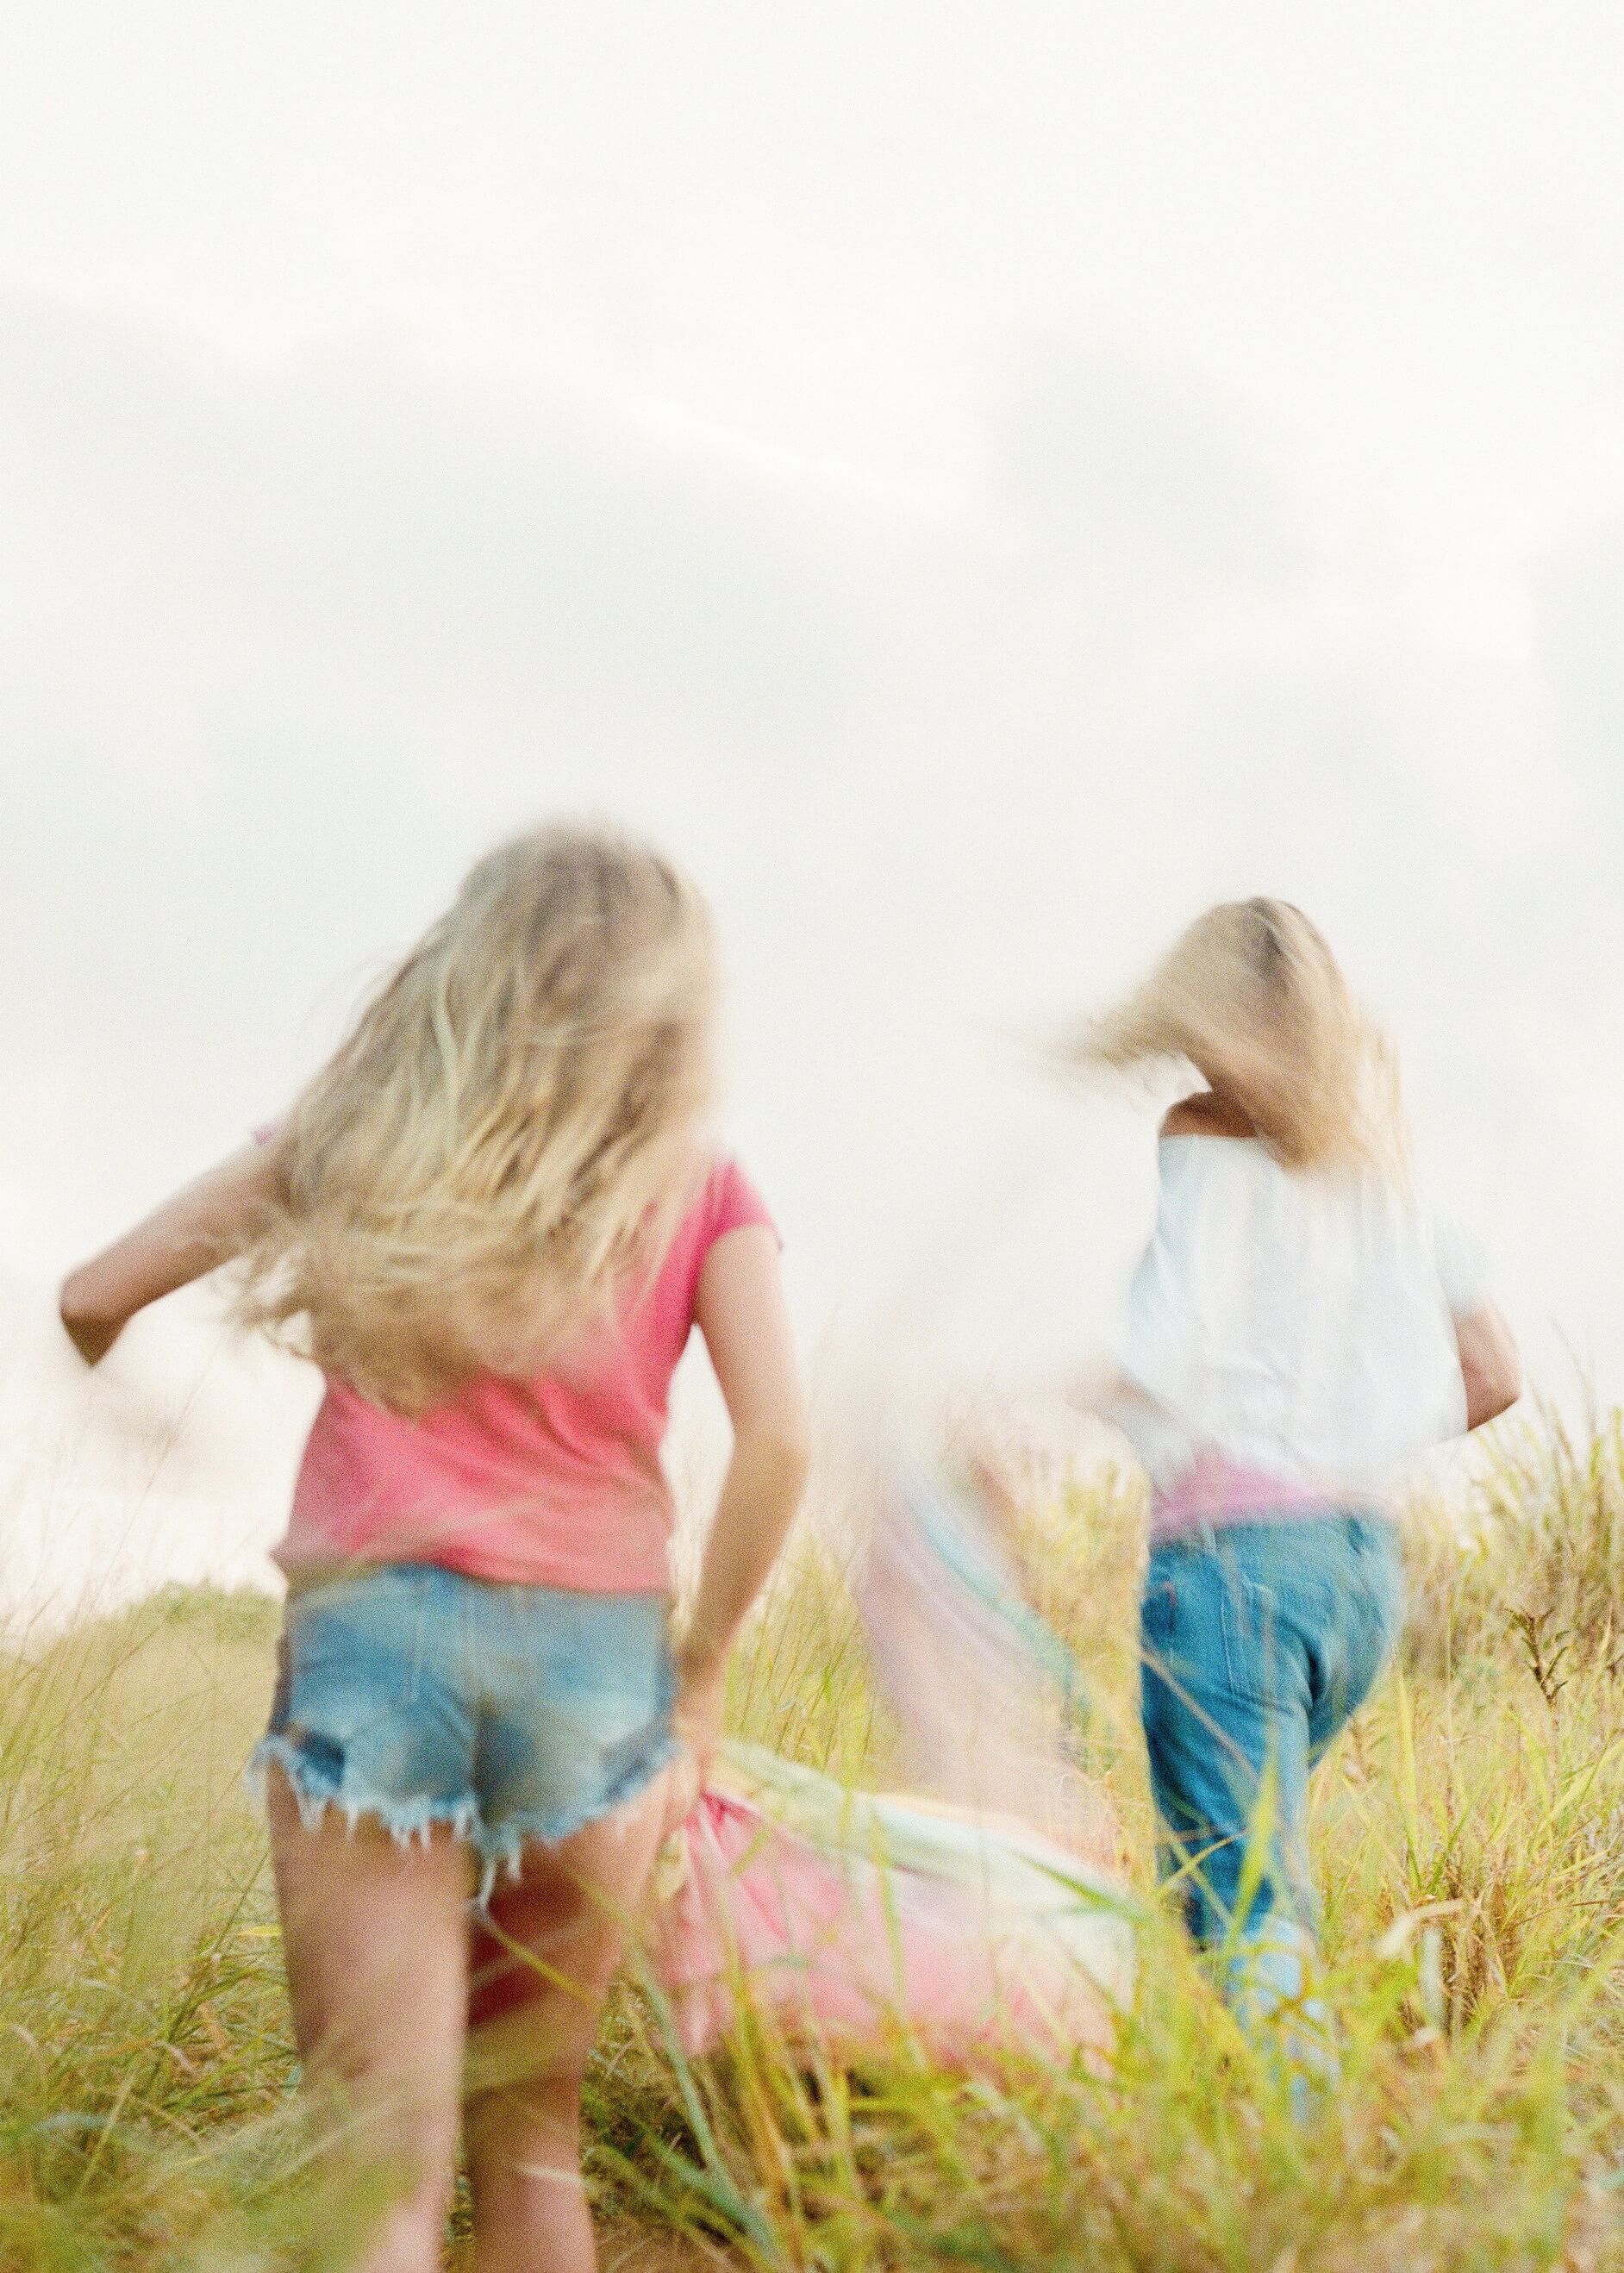 Blurred photo of little girls running in a field